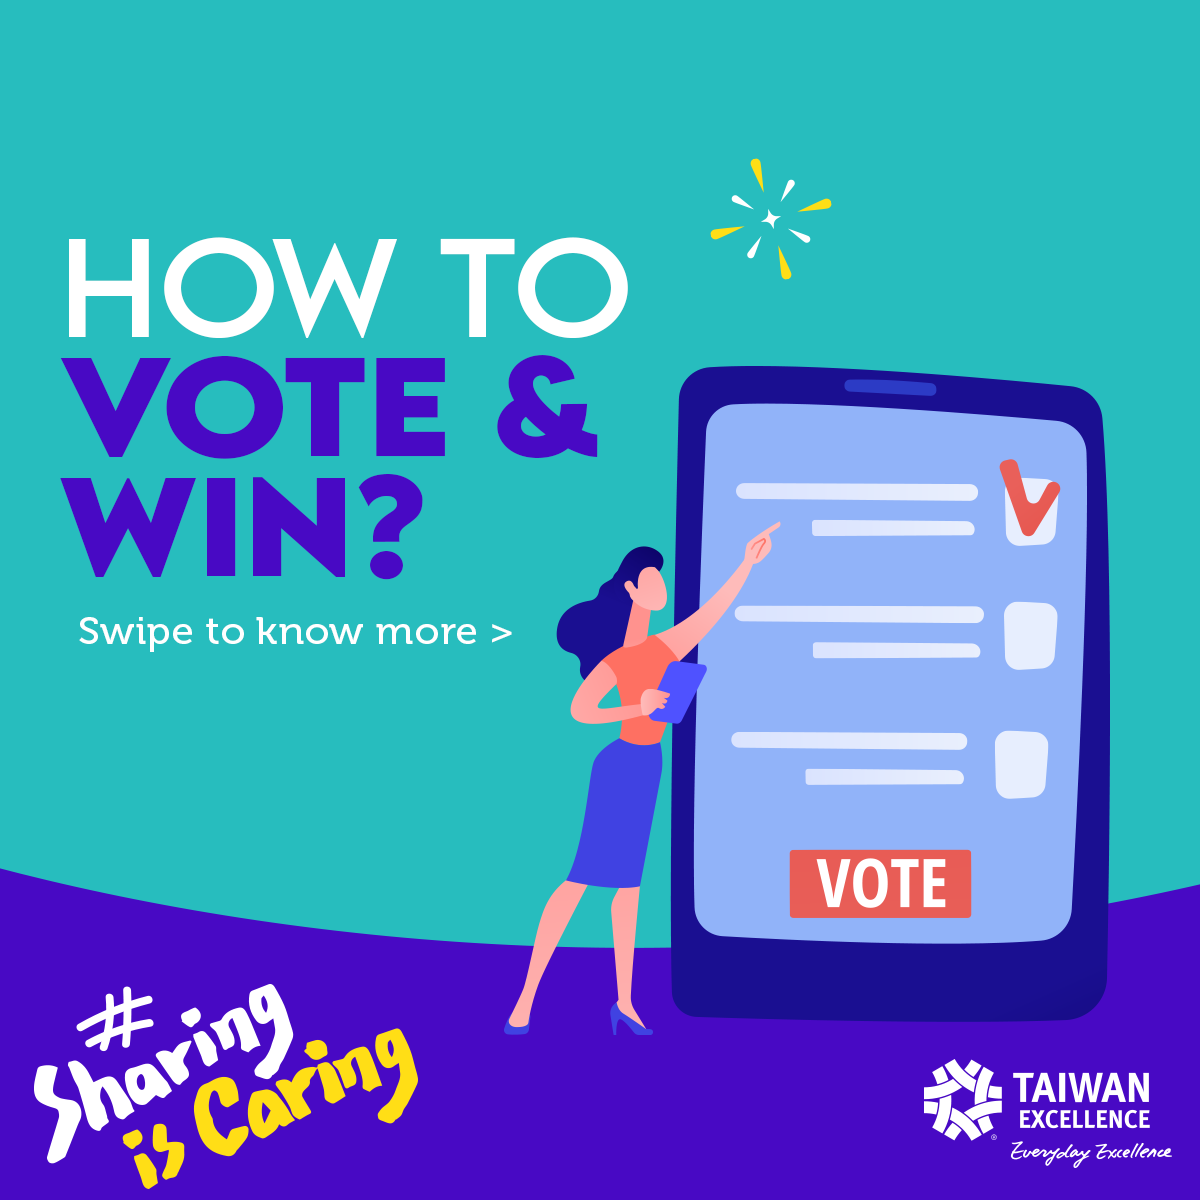 “Sharing Is Caring” Vote! picture-Taiwan Excellence